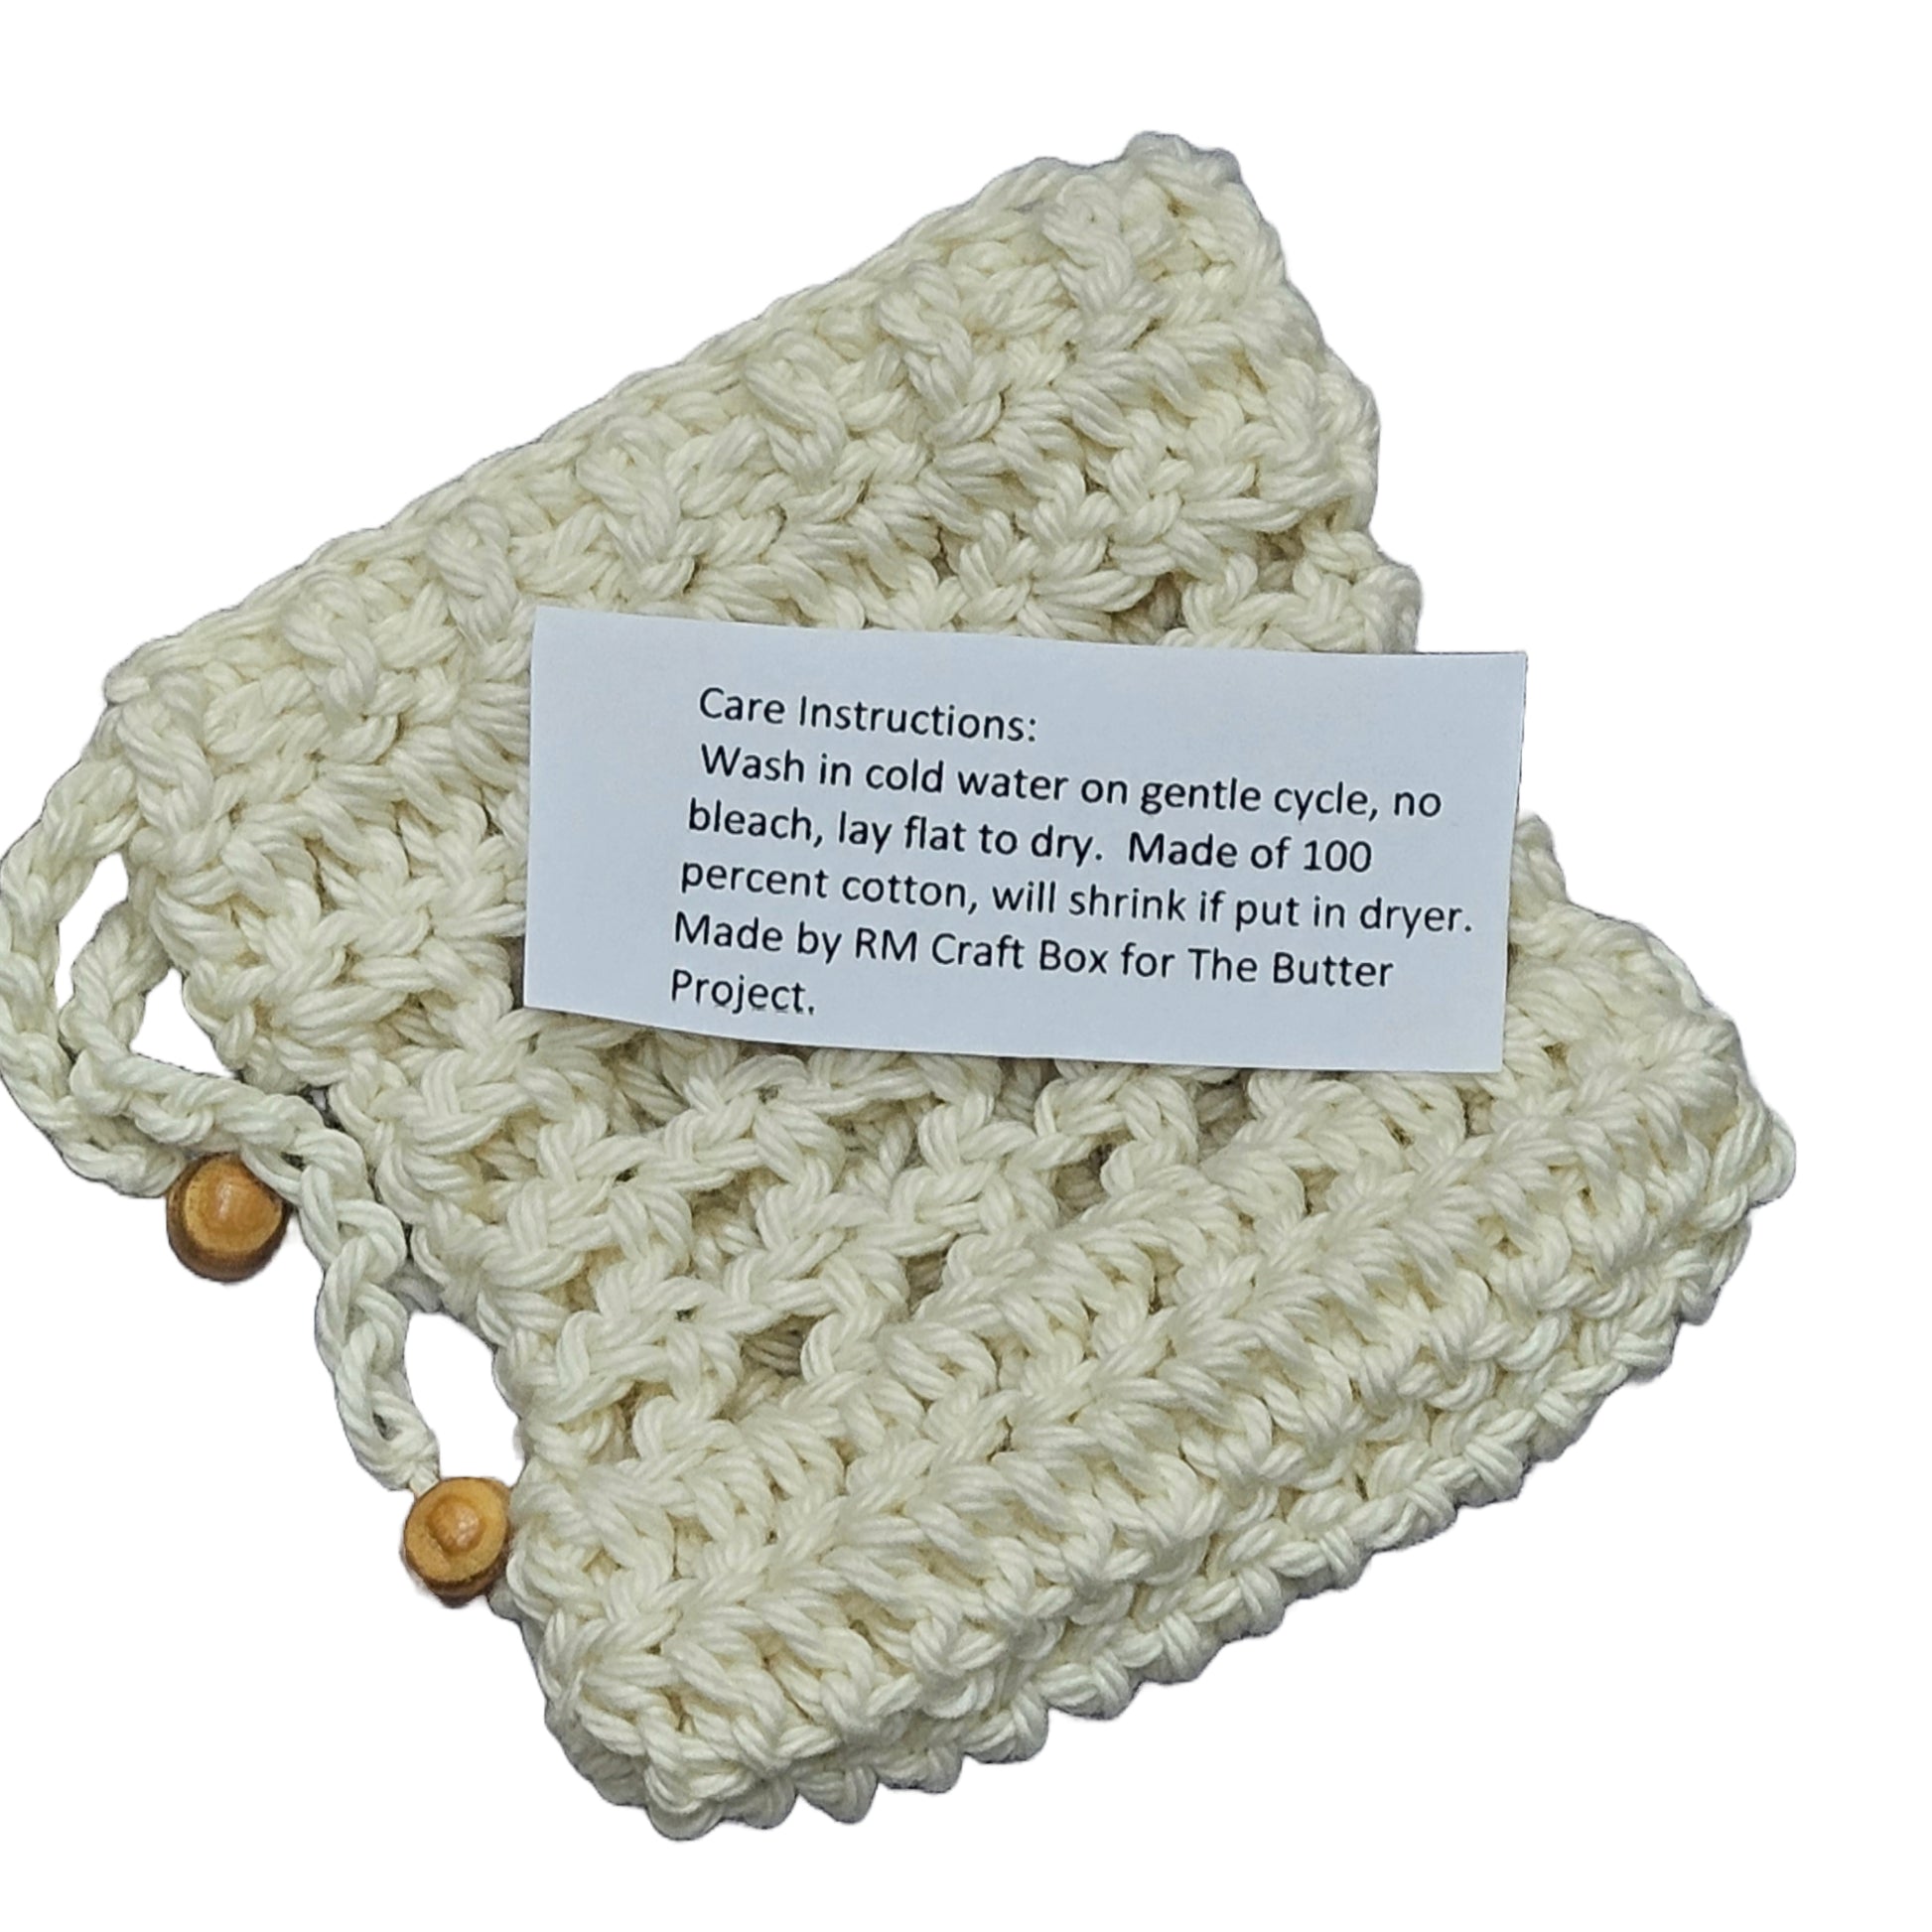 off white hand crochet cotton soap bag with decorative wood beads shown with care instructions